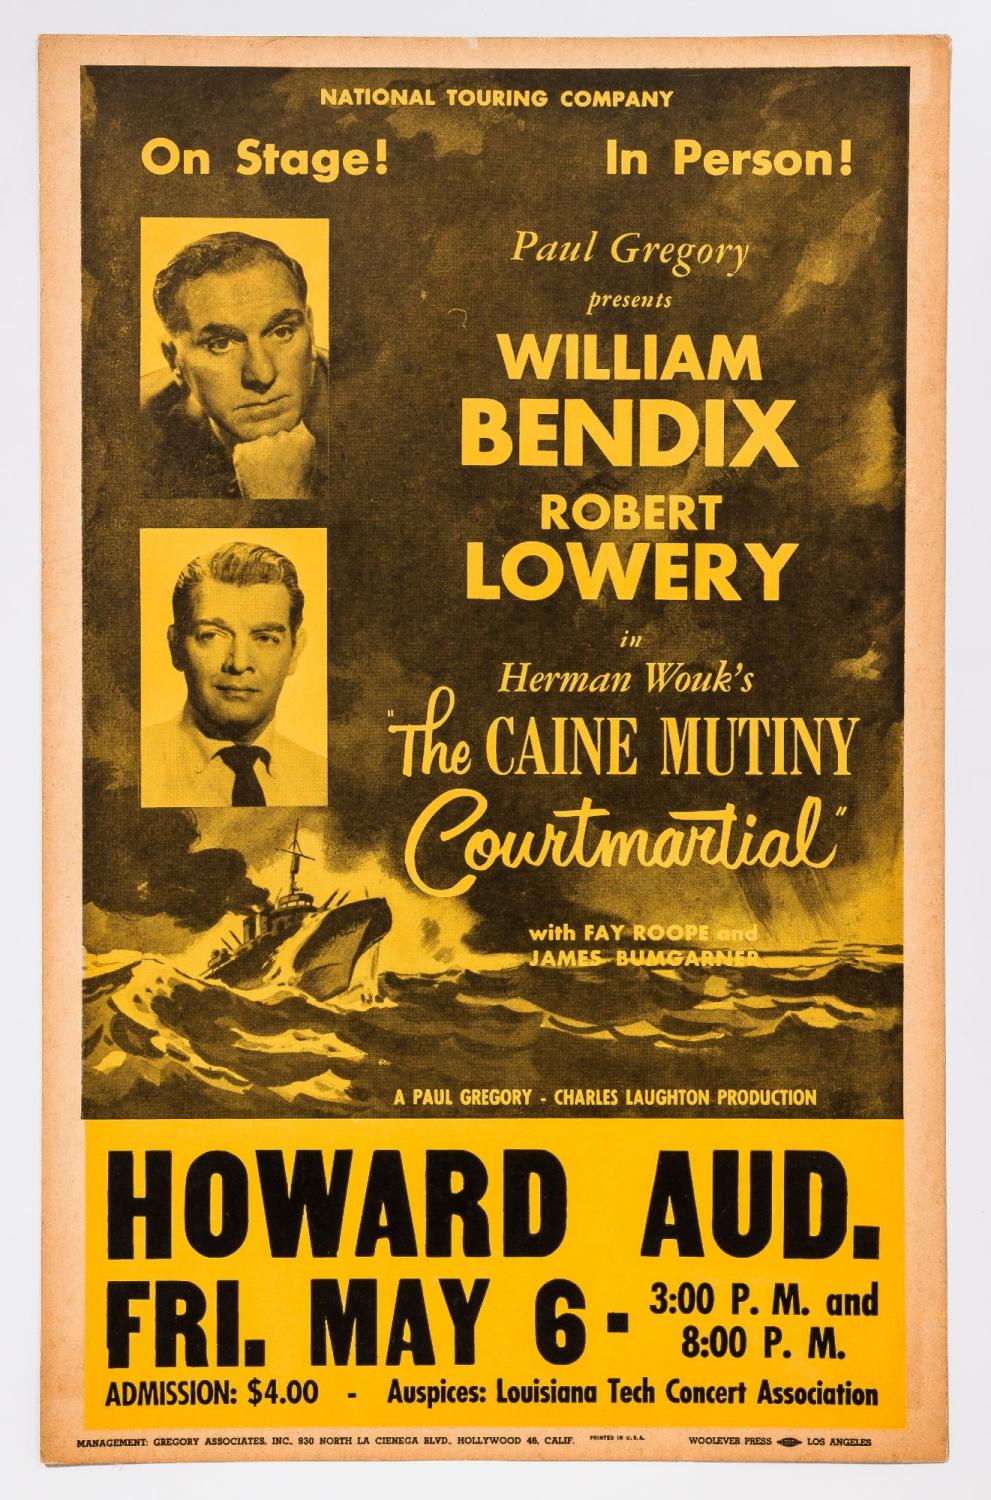 Broadside The Caine Mutiny Courtmartial By Bendix William